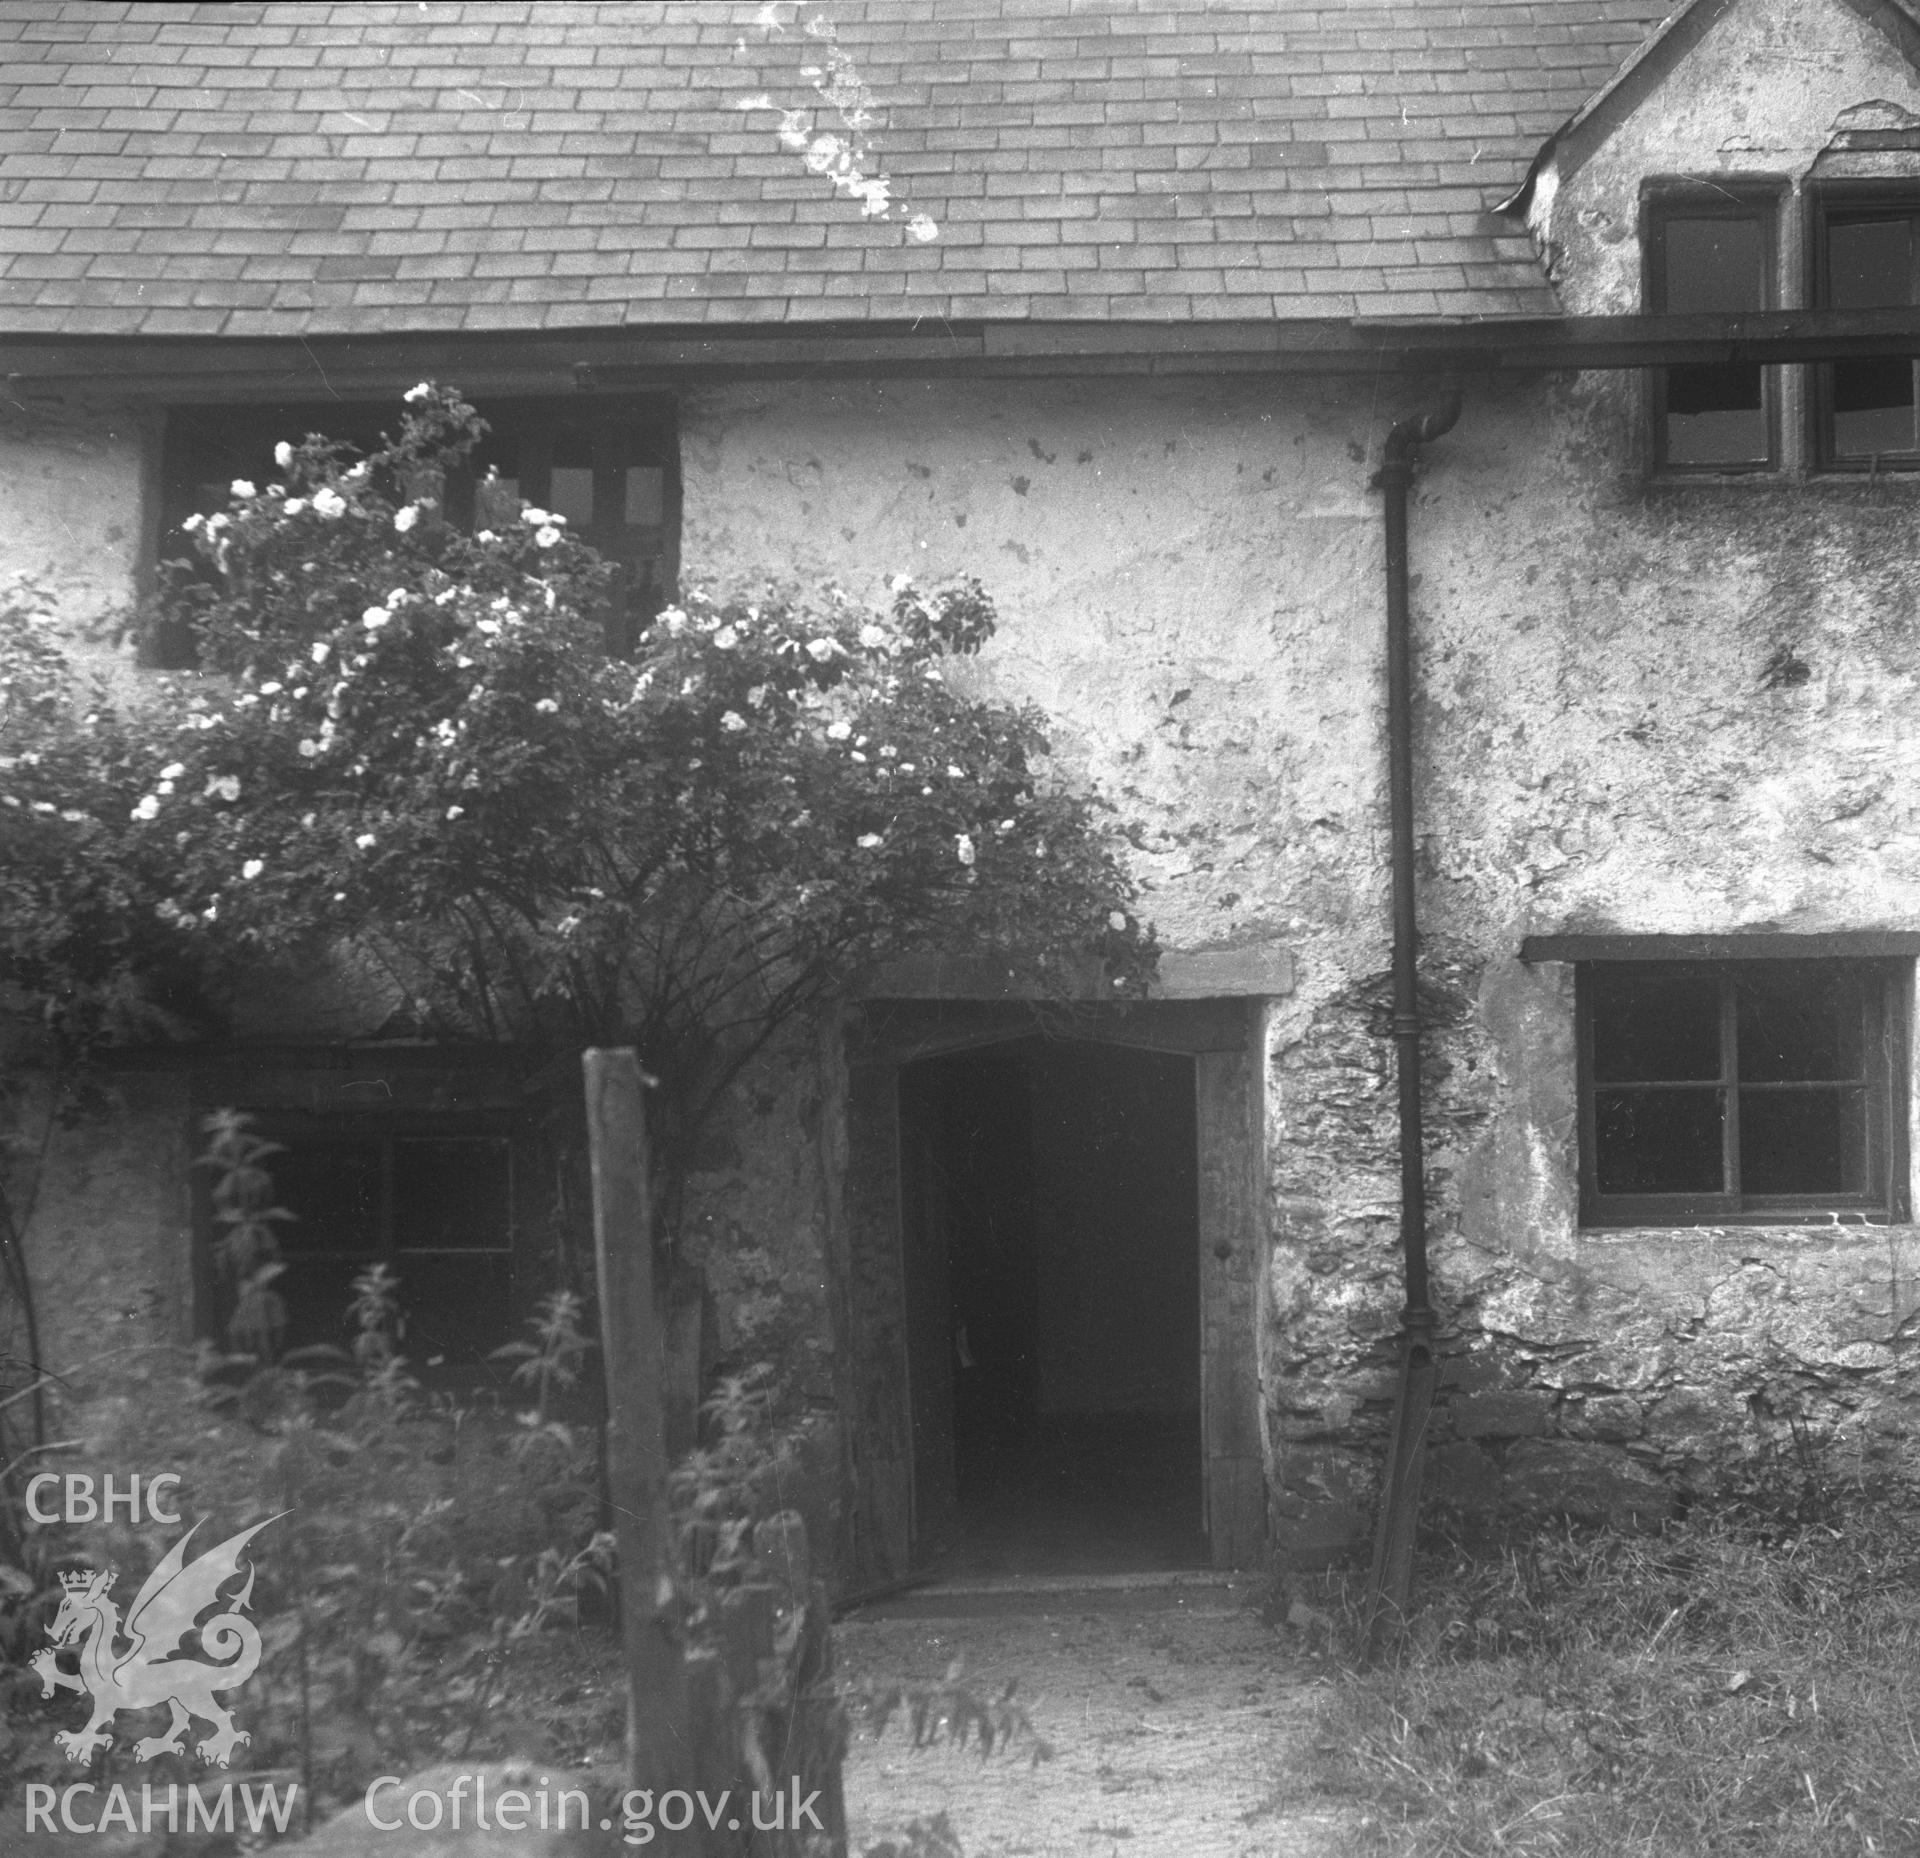 Black and white nitrate negative showing exterior view of front entrance, Brithdir Mawr, Flintshire.